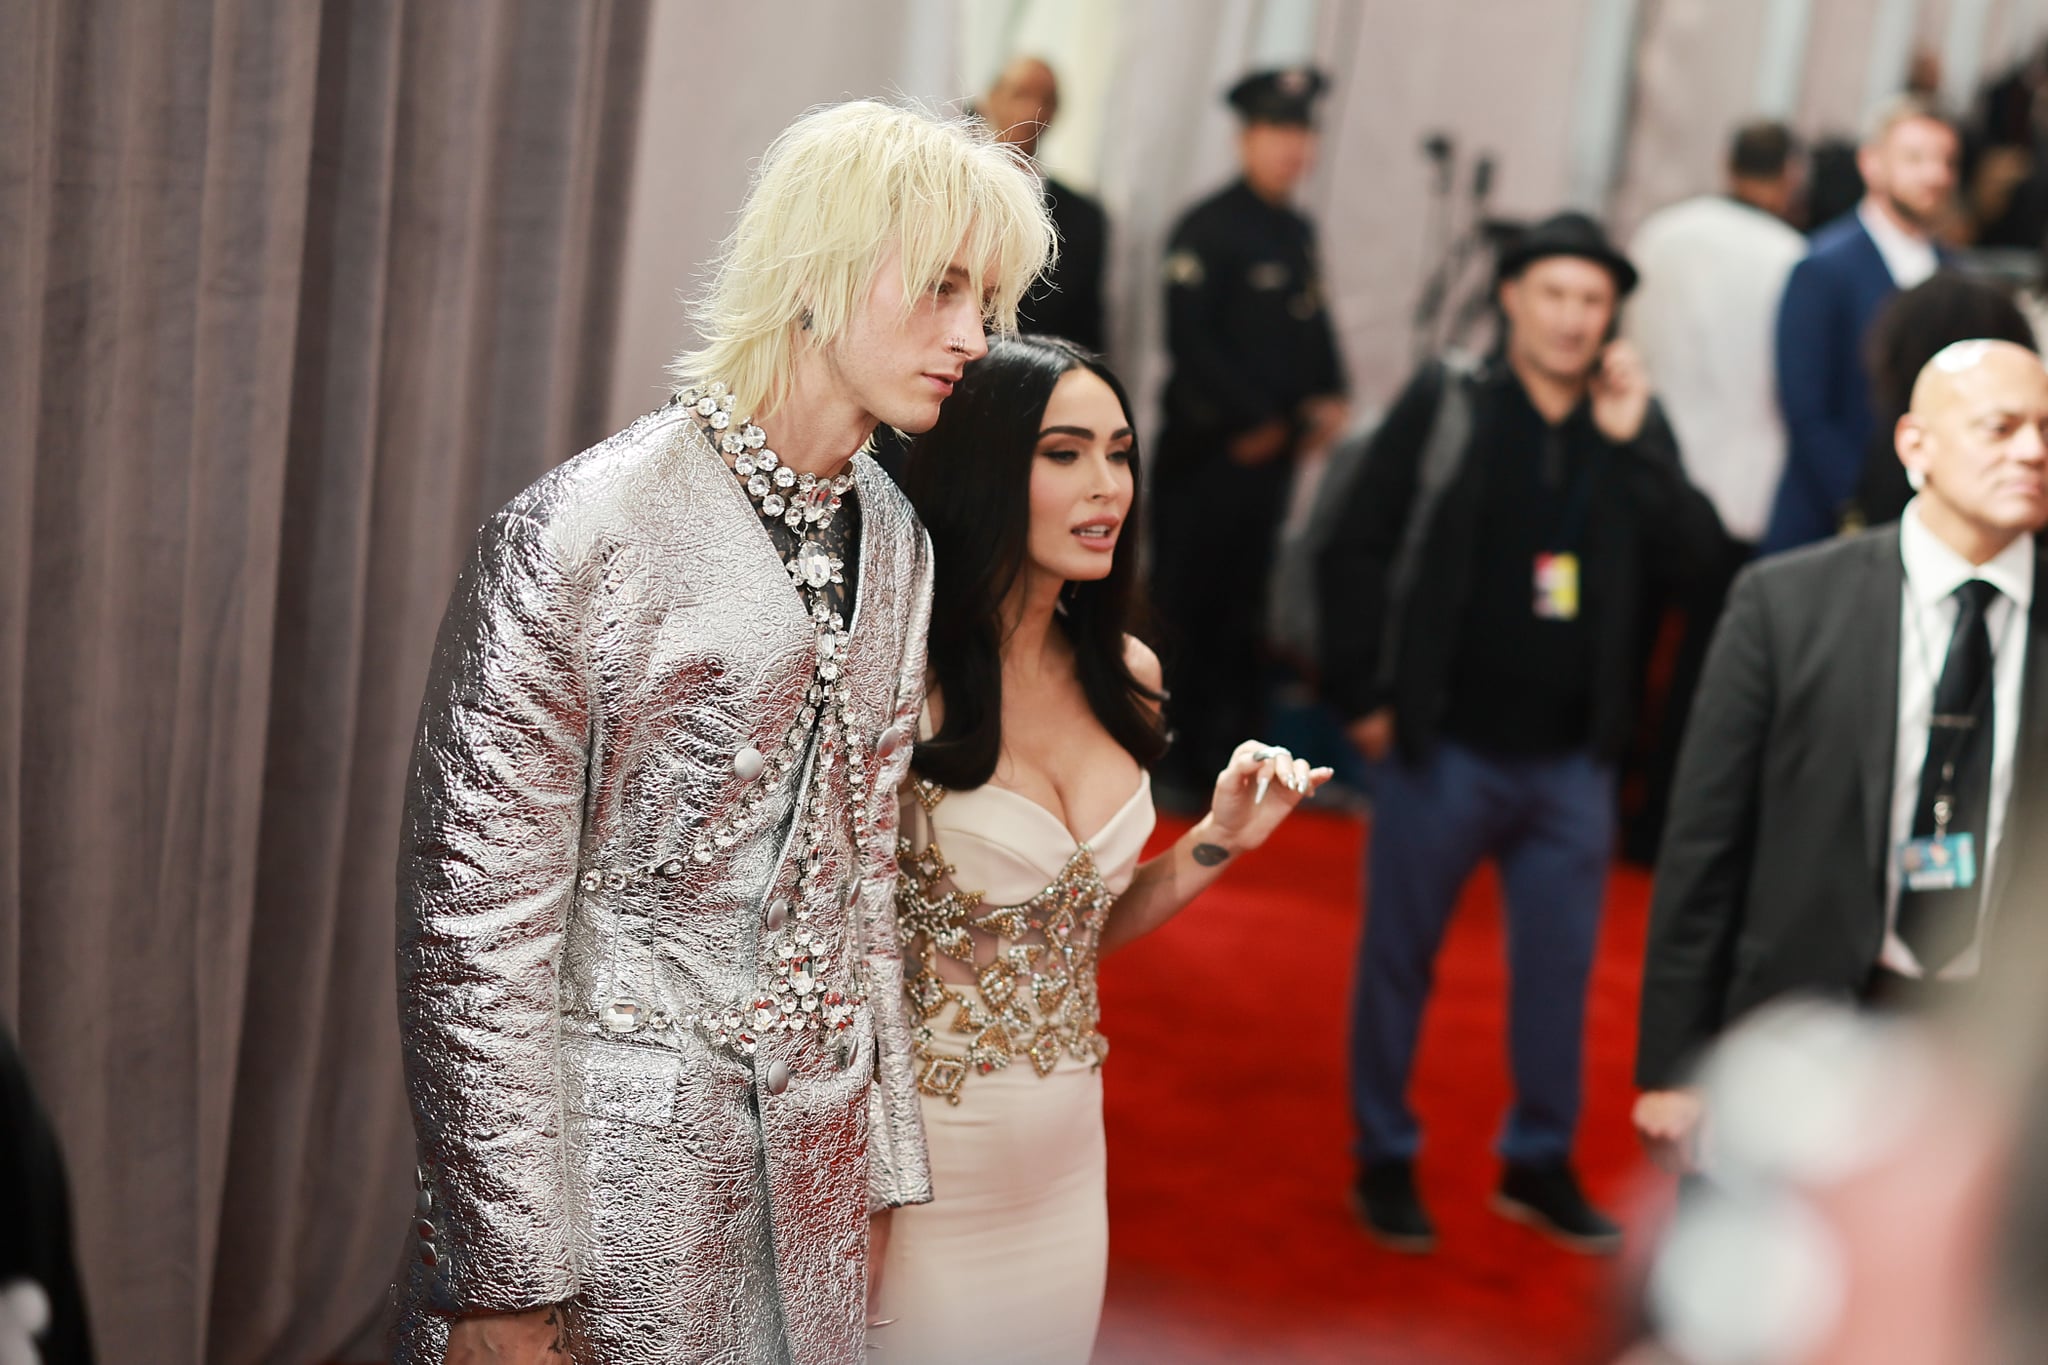 LOS ANGELES, CALIFORNIA - FEBRUARY 05: Machine Gun Kelly and Megan Fox attends the 65th GRAMMY Awards on February 05, 2023 in Los Angeles, California. (Photo by Matt Winkelmeyer/Getty Images for The Recording Academy)